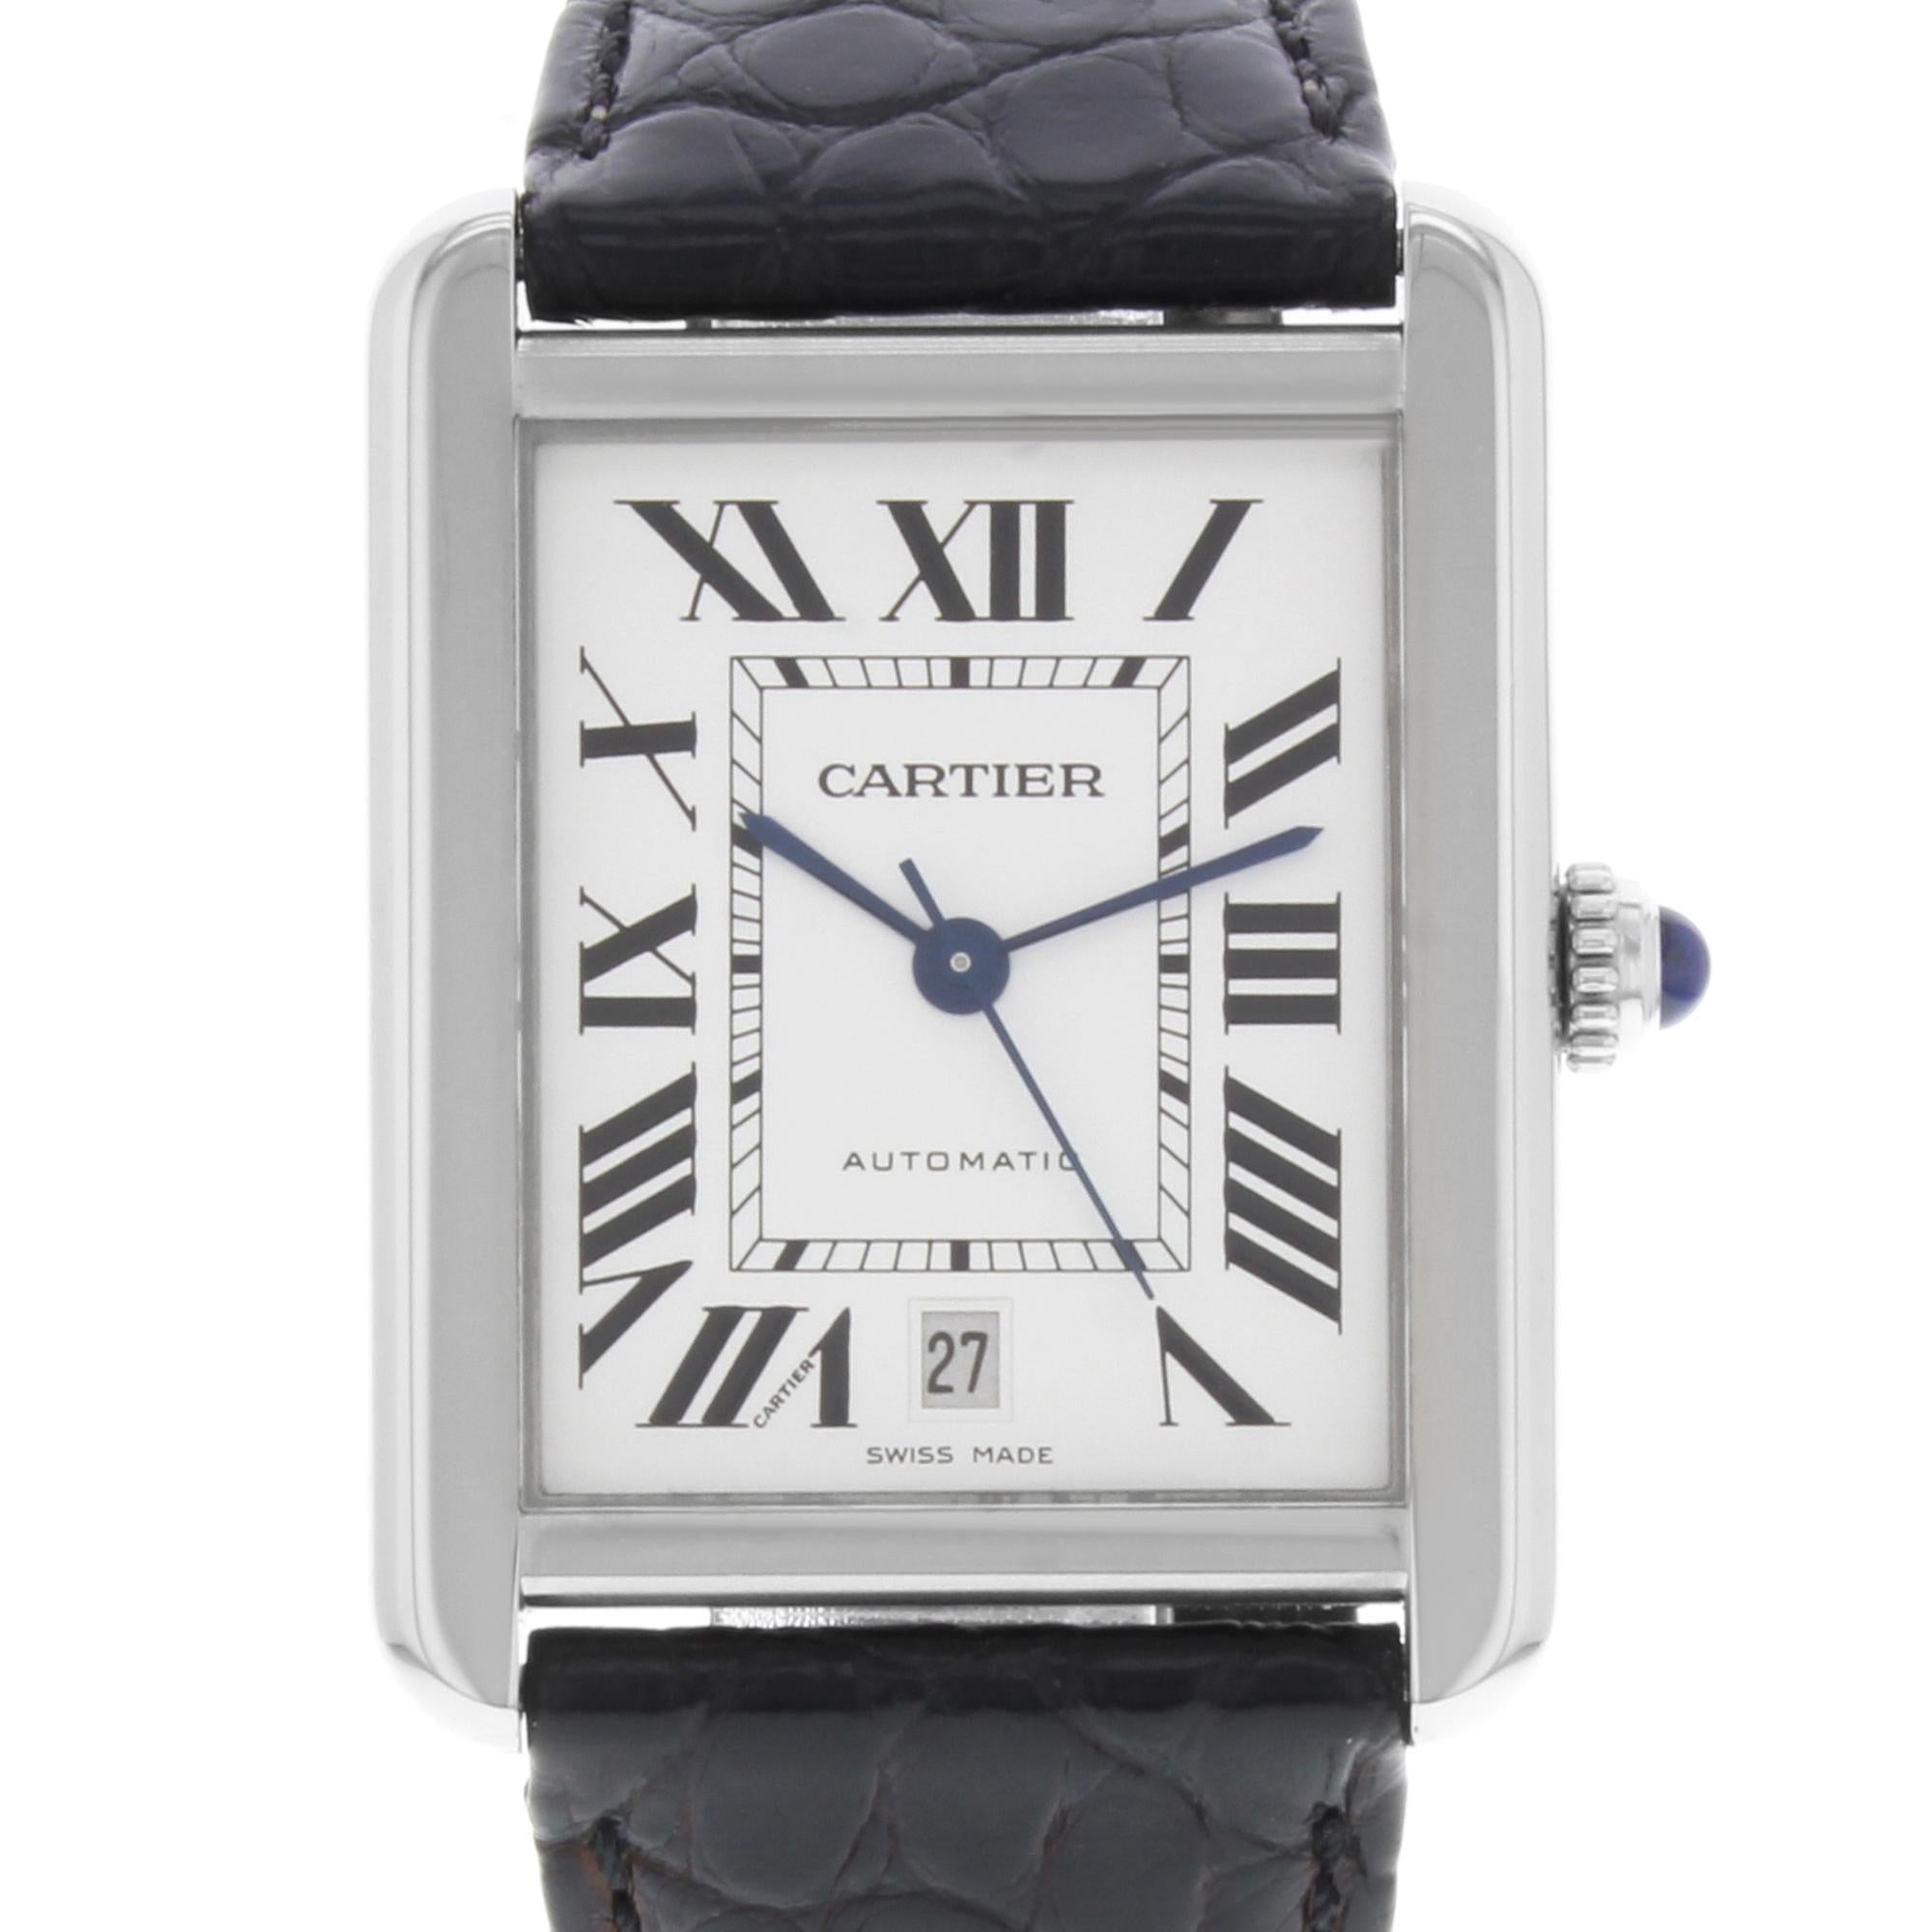 This pre-owned Cartier Tank W5200027  is a beautiful men's timepiece that is powered by an automatic movement which is cased in a stainless steel case. It has a rectangle shape face, date dial and has hand roman numerals style markers. It is